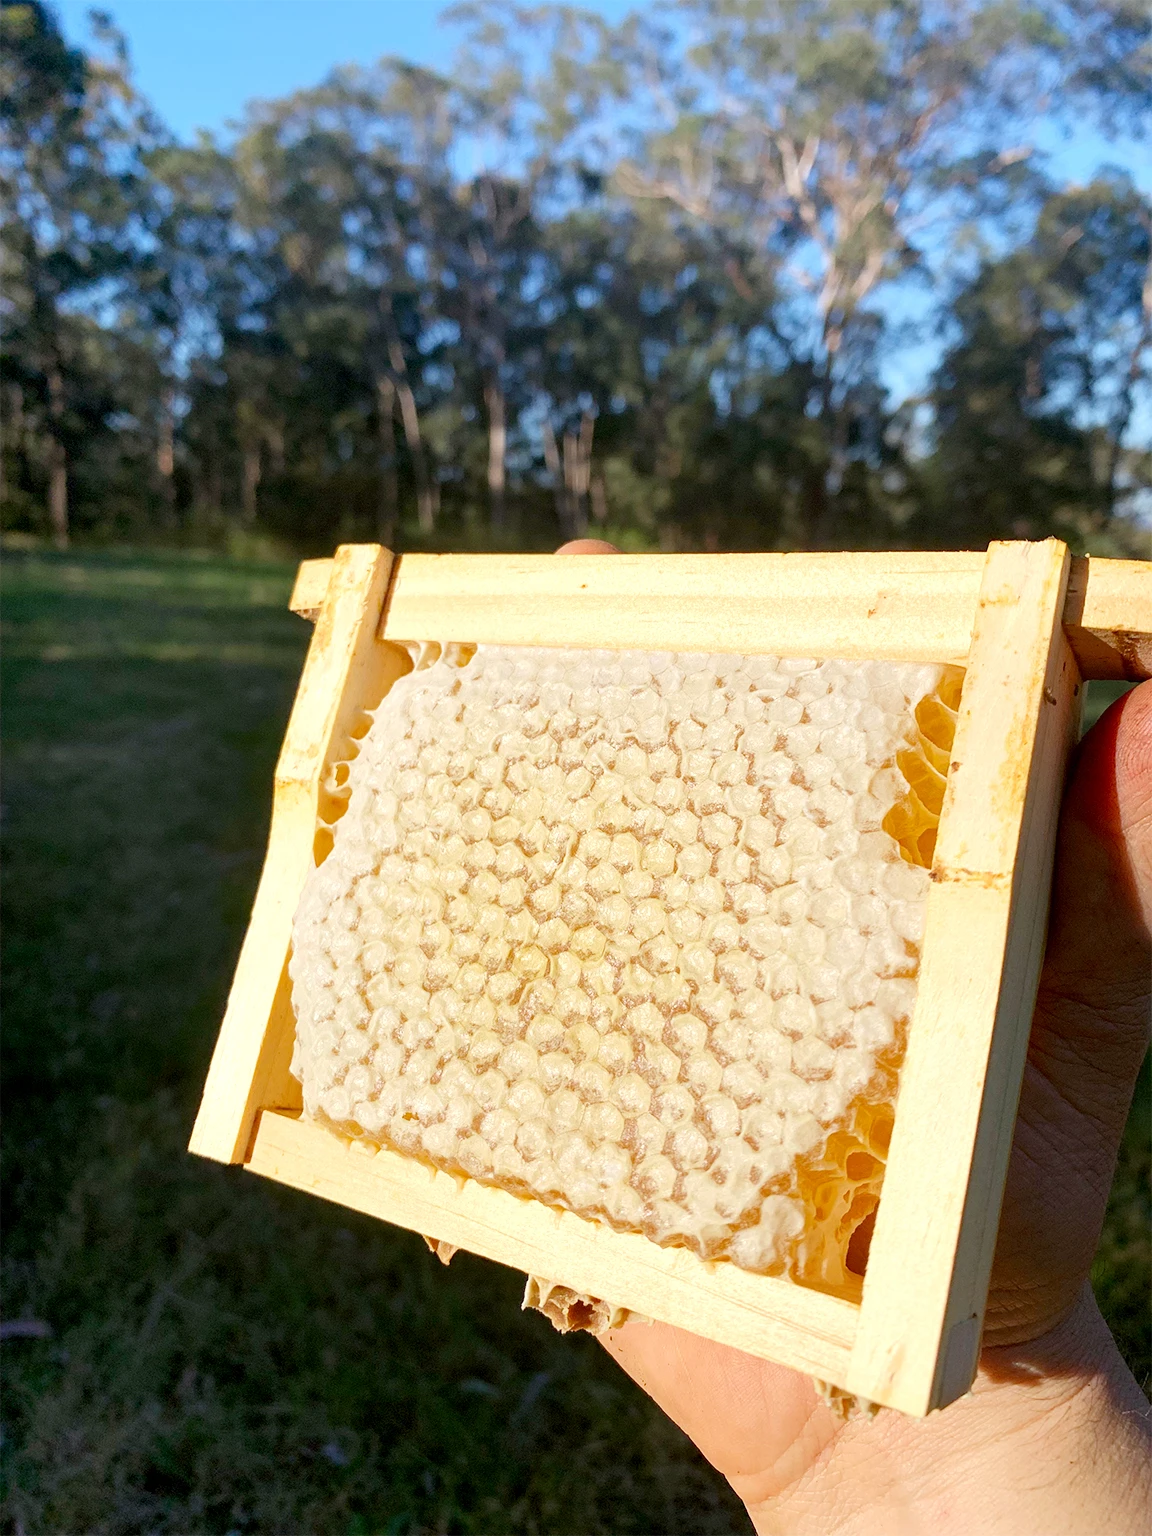 Malfroy's Gold, Blue Mountains Yellow Bloodwood Honeycomb